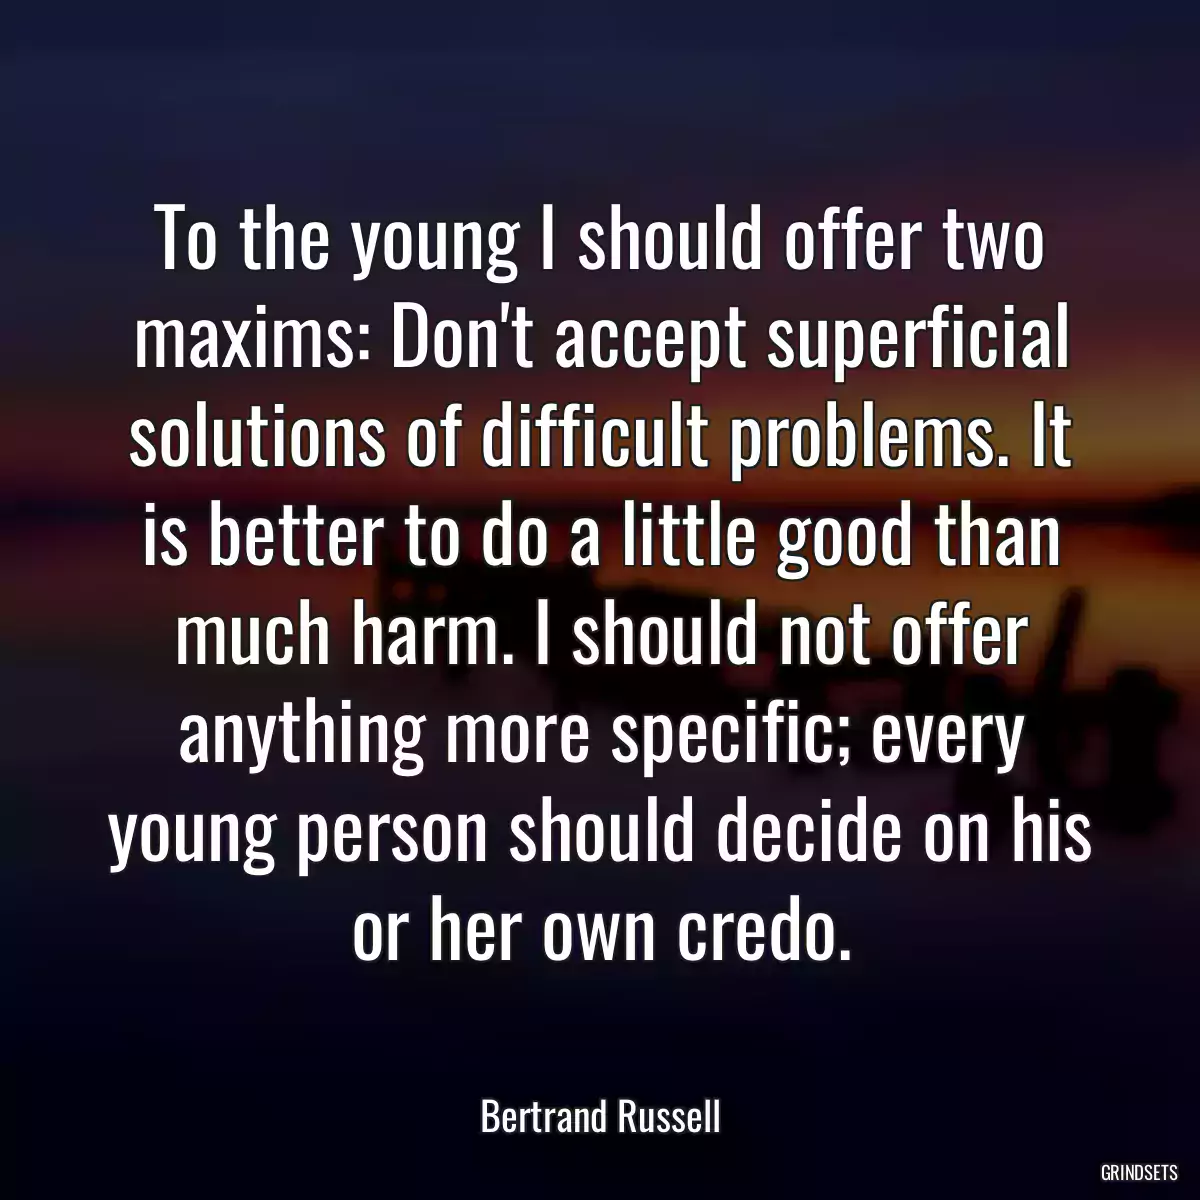 To the young I should offer two maxims: Don\'t accept superficial solutions of difficult problems. It is better to do a little good than much harm. I should not offer anything more specific; every young person should decide on his or her own credo.